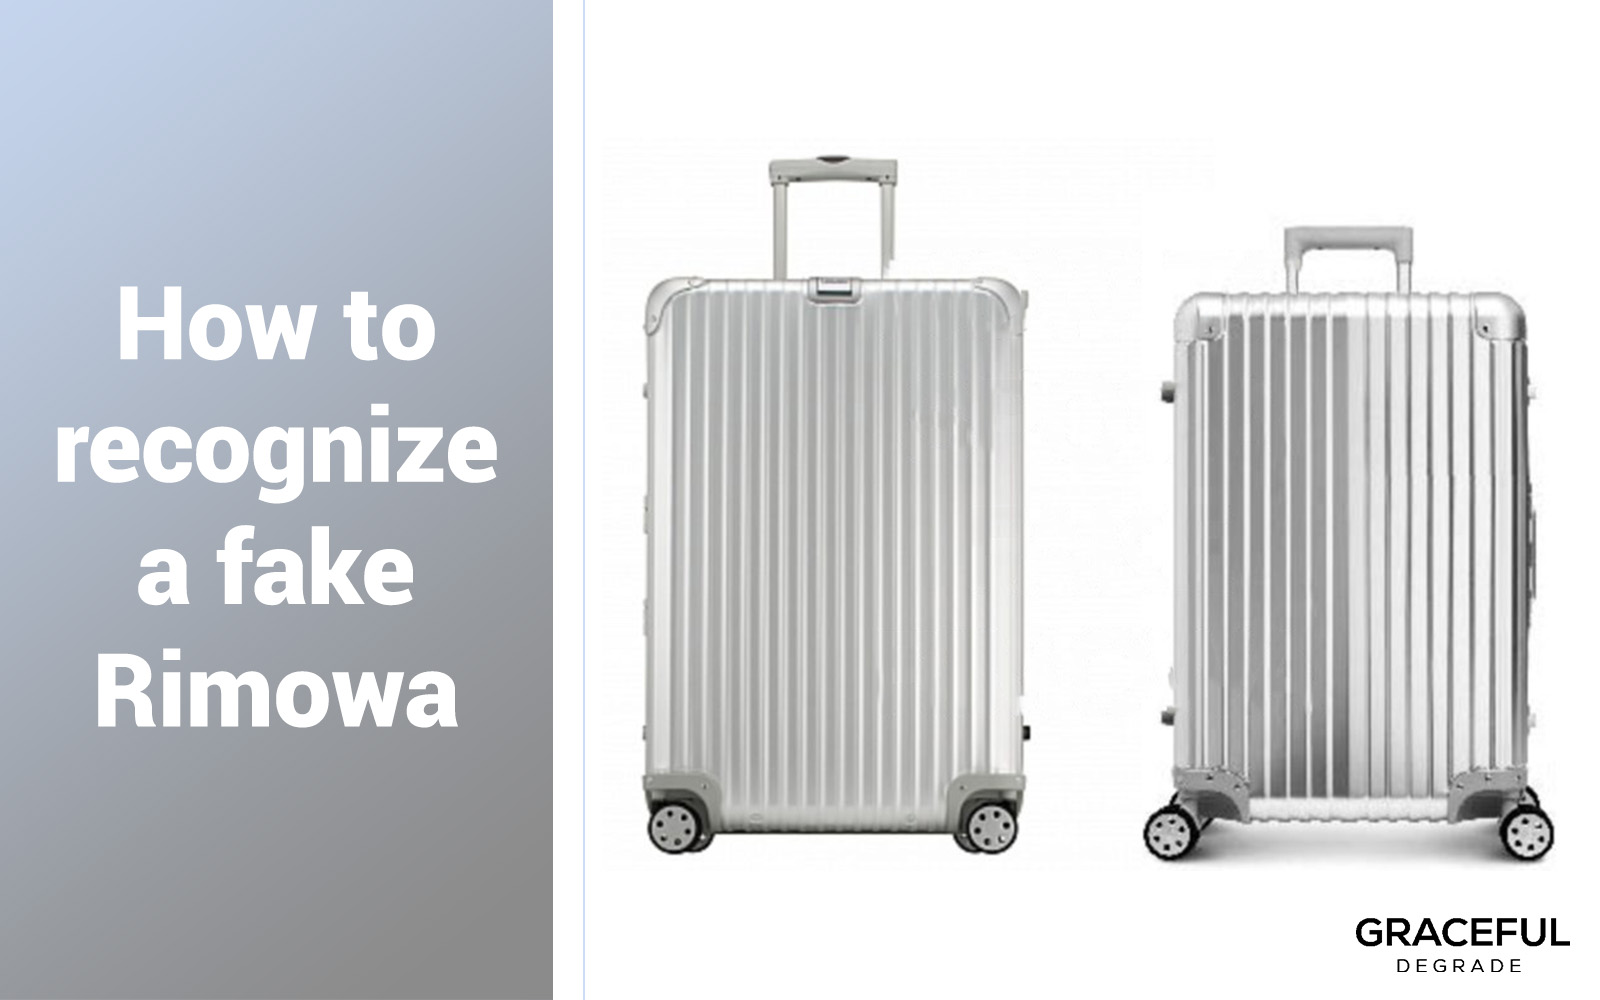 Supreme x Rimowa Is the Most Hype Luggage I've Ever Seen